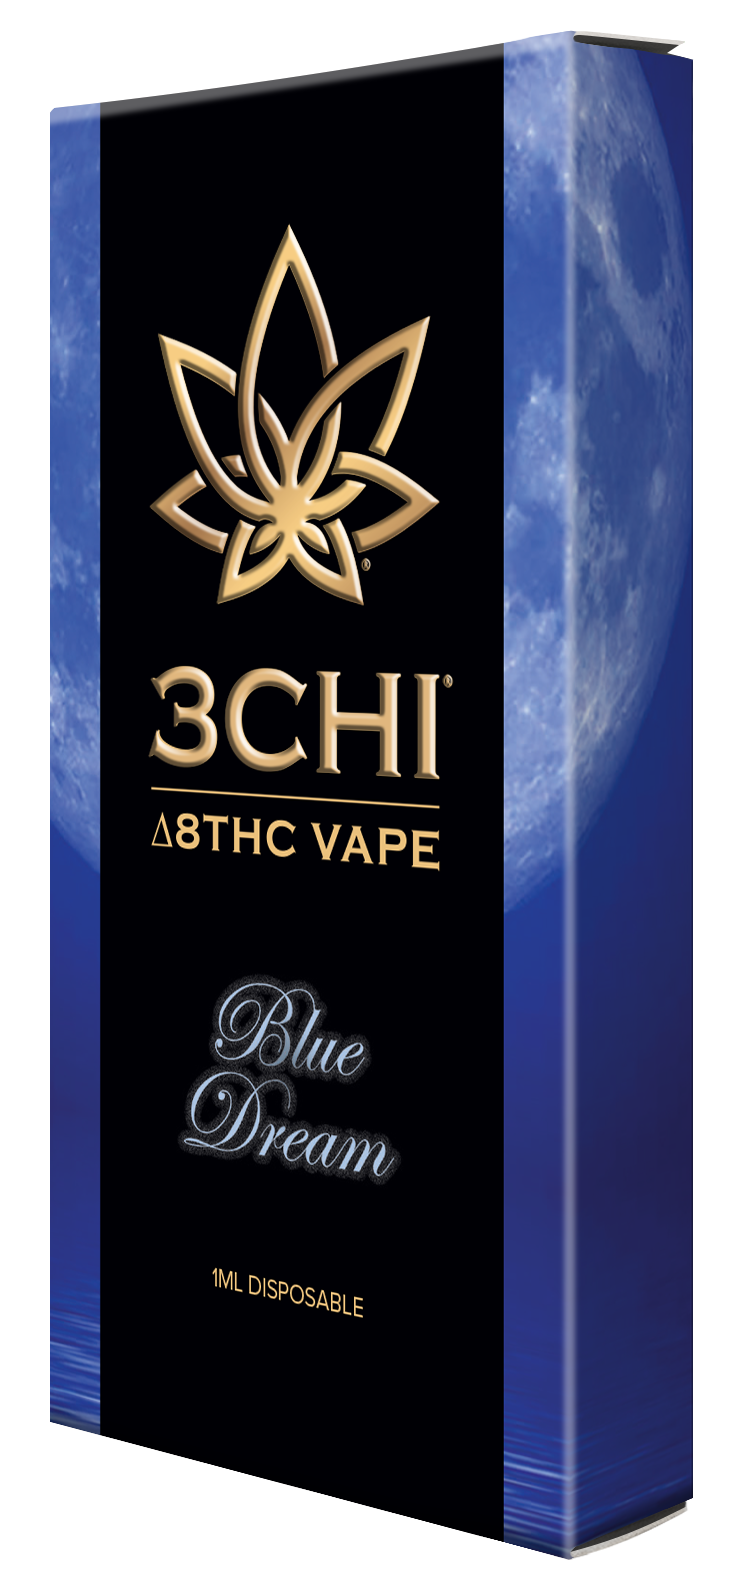 3CHI Delta 8 disposable vape pens like Blue Dream bring popular flavors and strains to consumers. Delta 8 disposable vapes are convenient and allow you to exhale wellness anywhere.